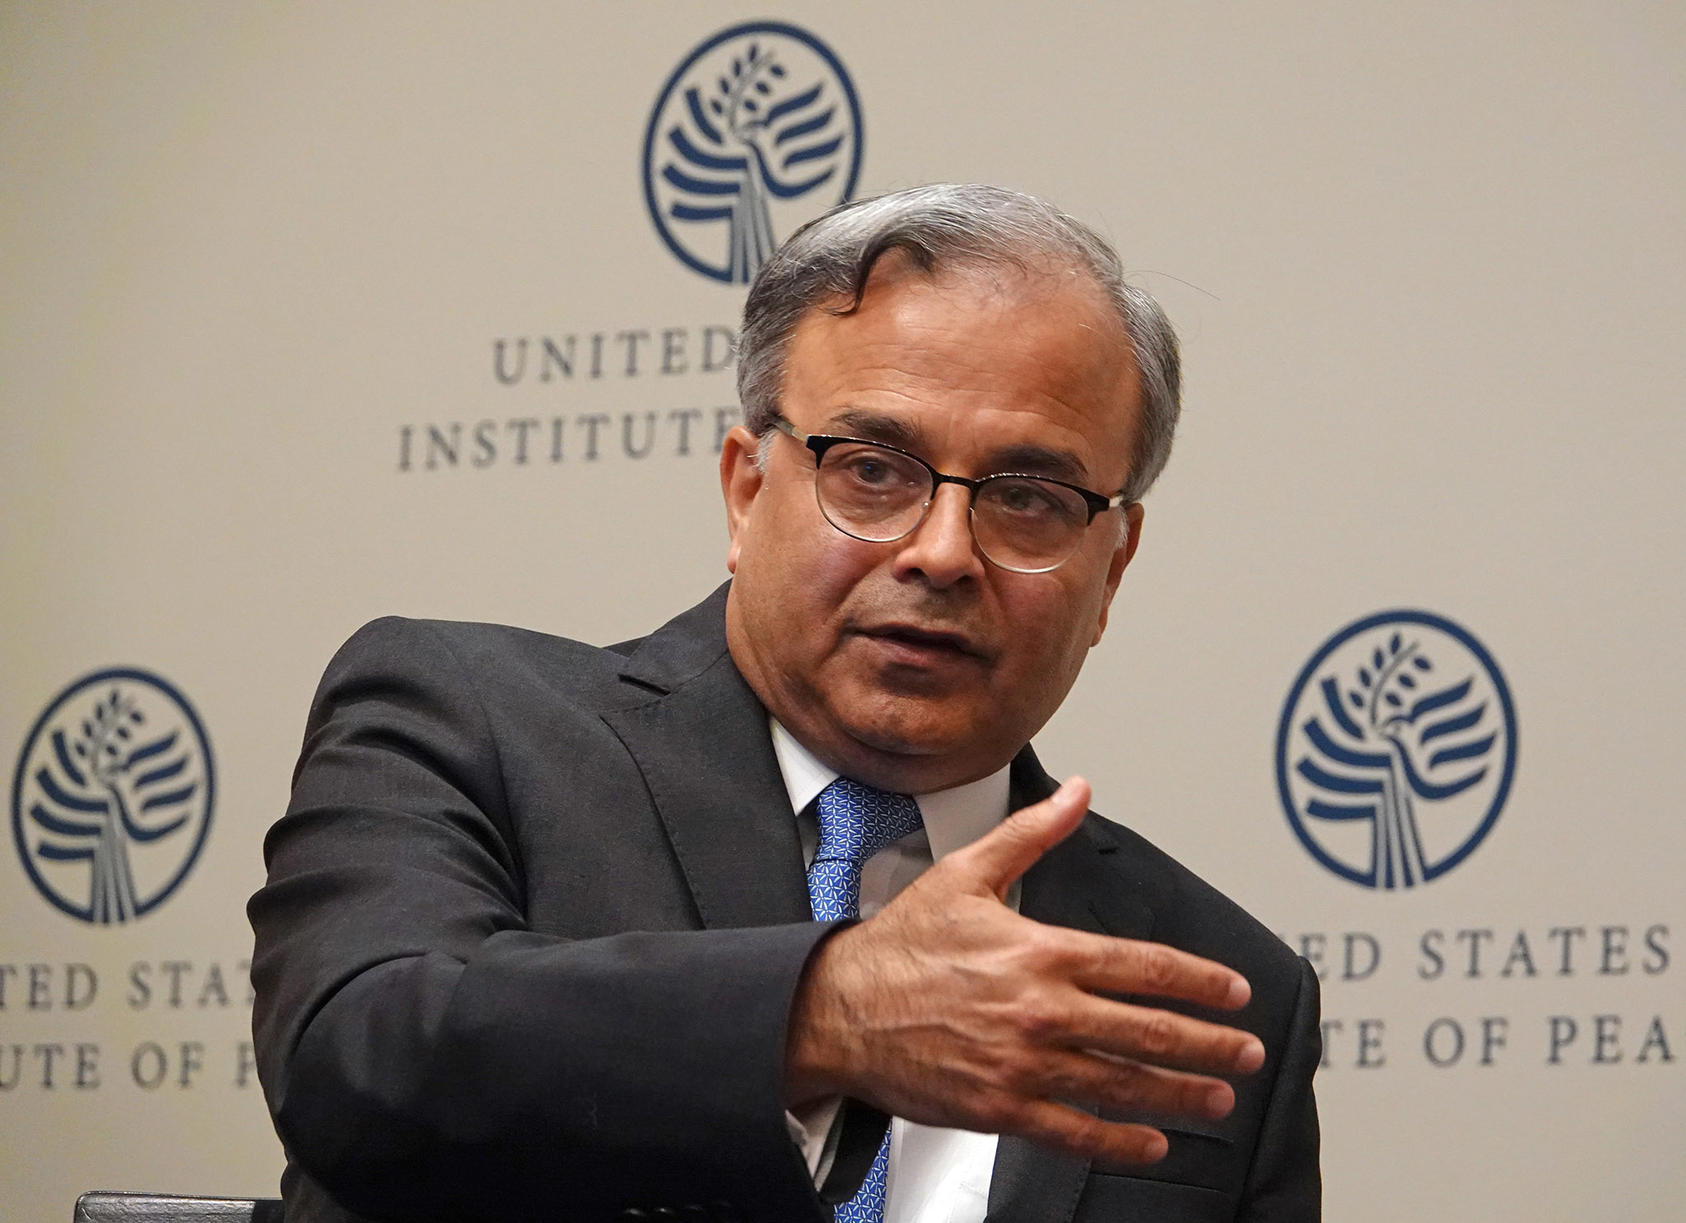 Pakistani Ambassador Asad Majeed Khan speaking at USIP, July 7, 2021. “Investing in peace in Afghanistan is basically the best counterterrorism measure and the best guarantee against [needing to fight] terrorism in Afghanistan,” said Khan.